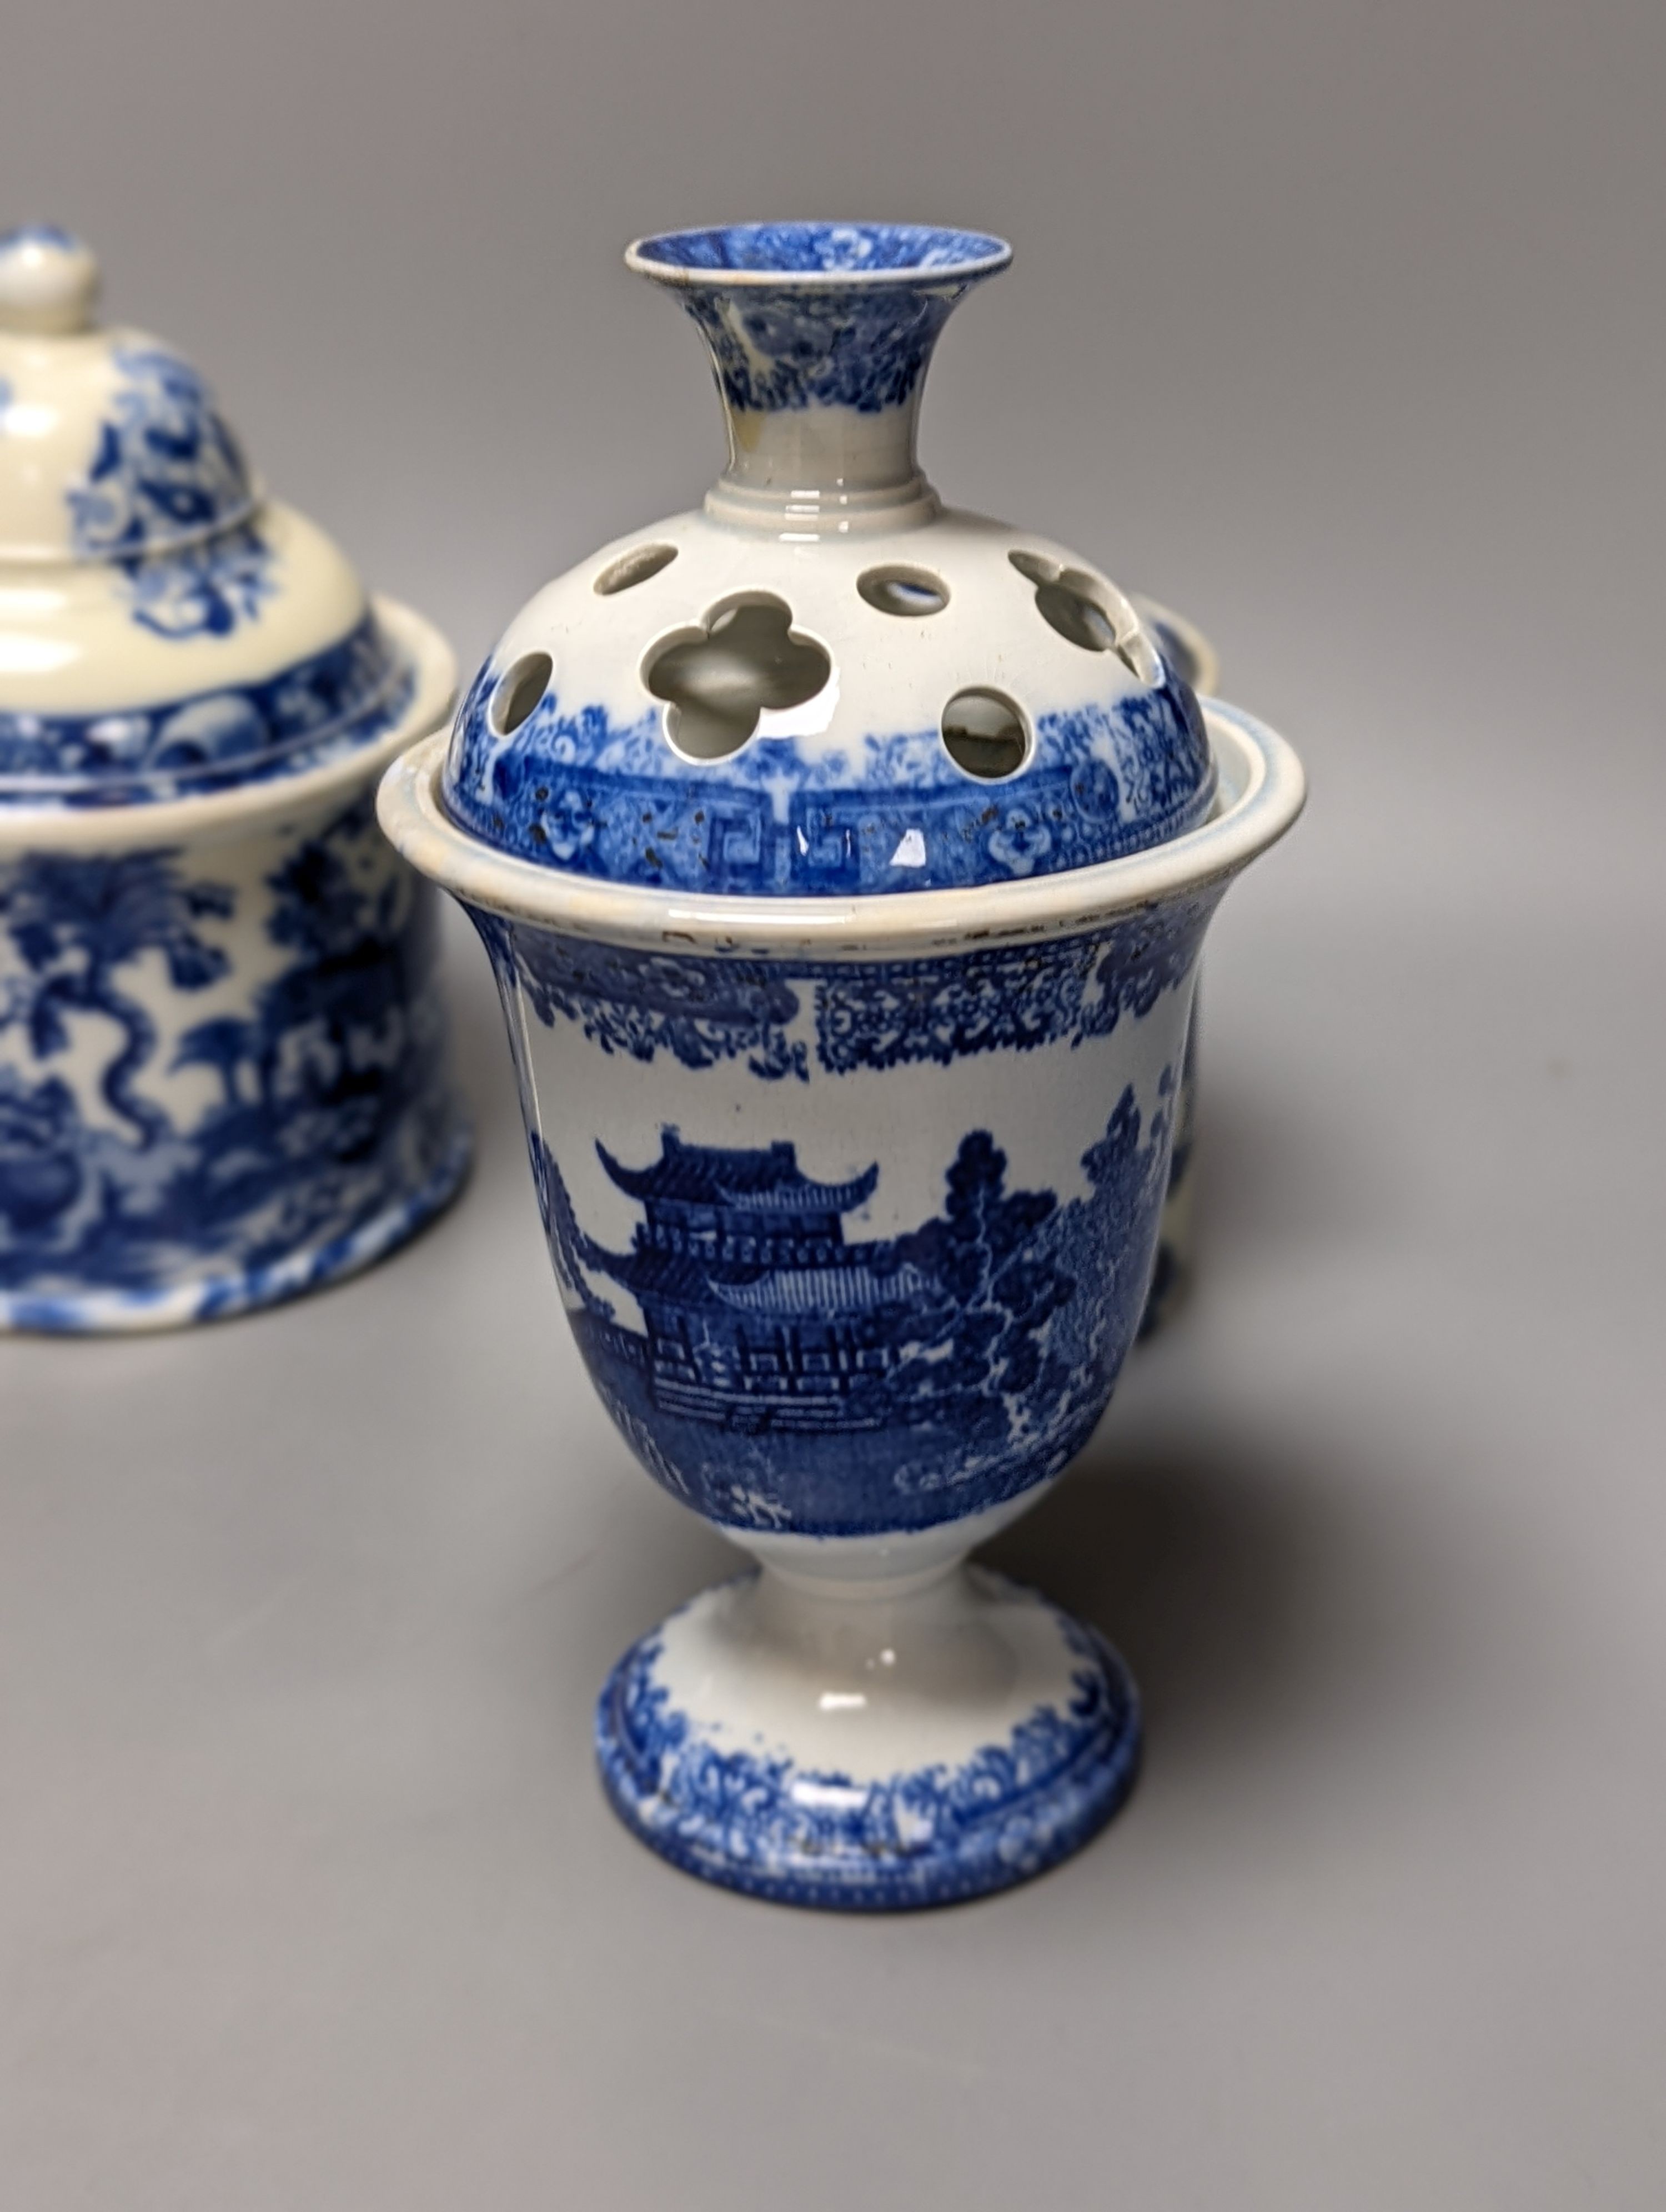 Four items of early 19th century blue and white pearlware pottery, an 18th century Delft blue and white vase and a 19th century toothbrush holder, Delft vase 22 cms high.